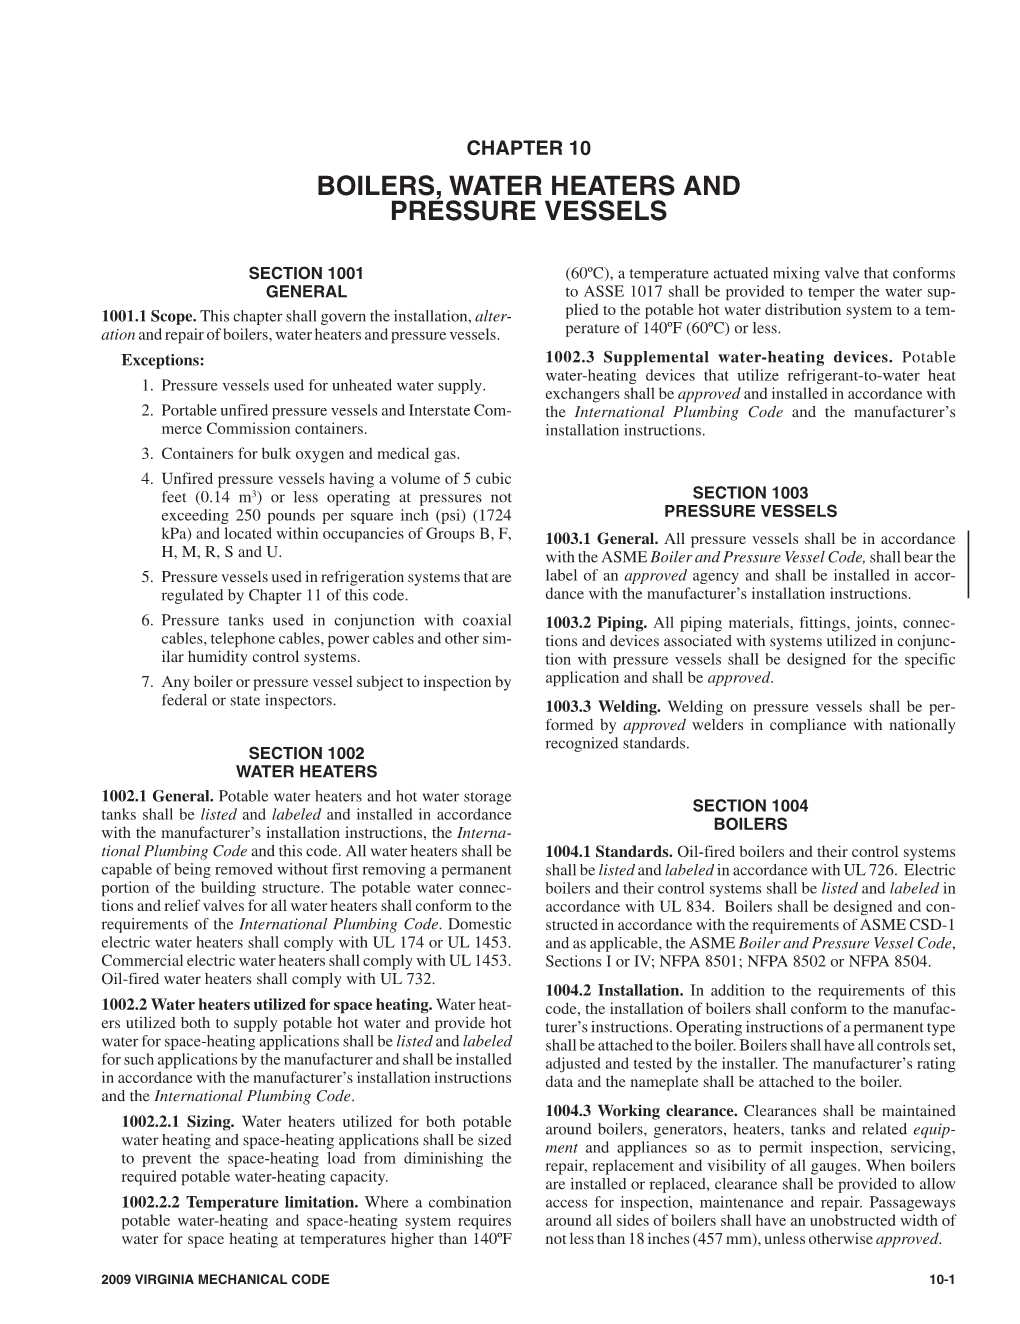 Chapter 10 Boilers, Water Heaters and Pressure Vessels